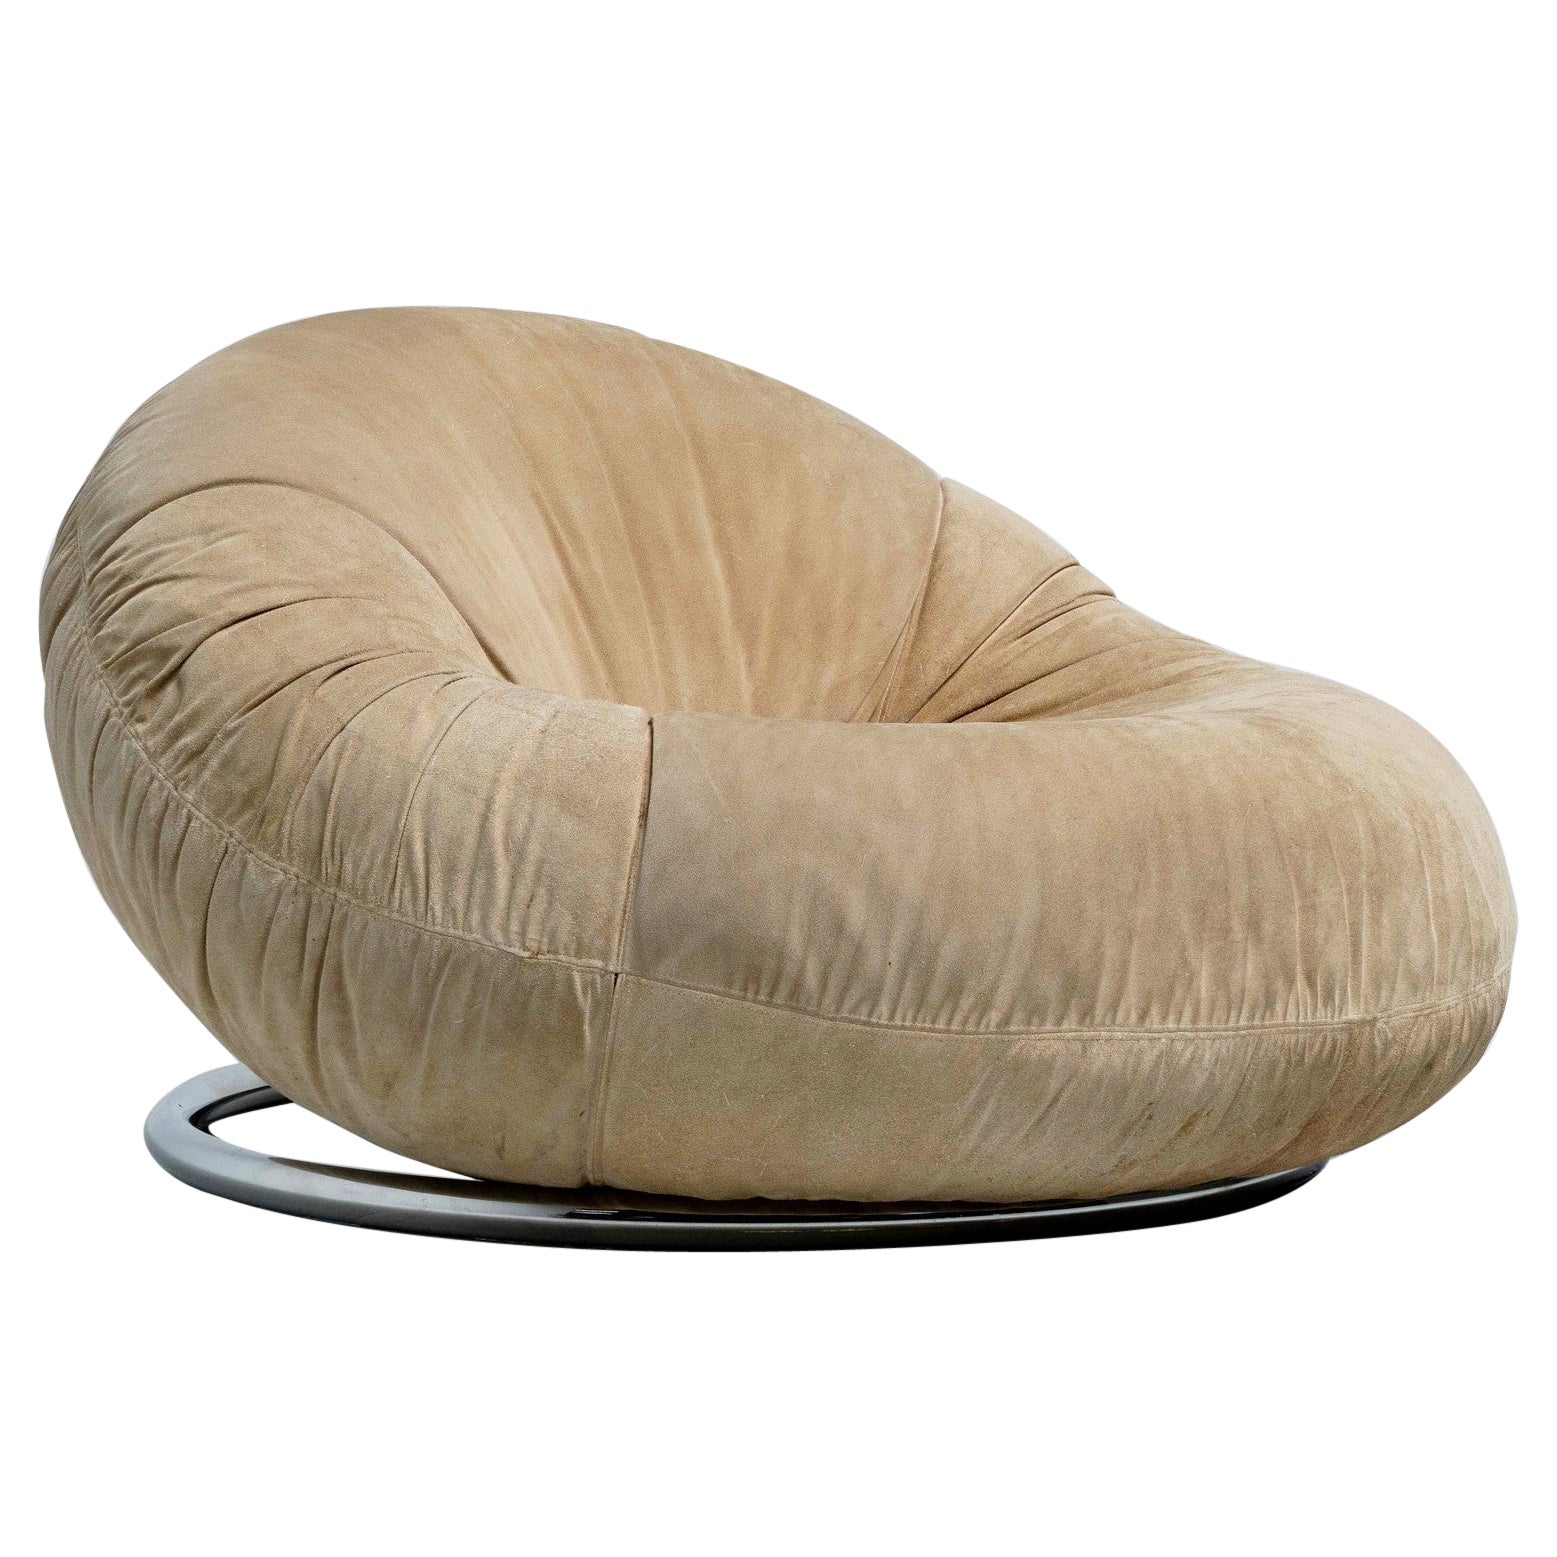 Donut Shaped Lounge Chair in Suede Italy, 1970s